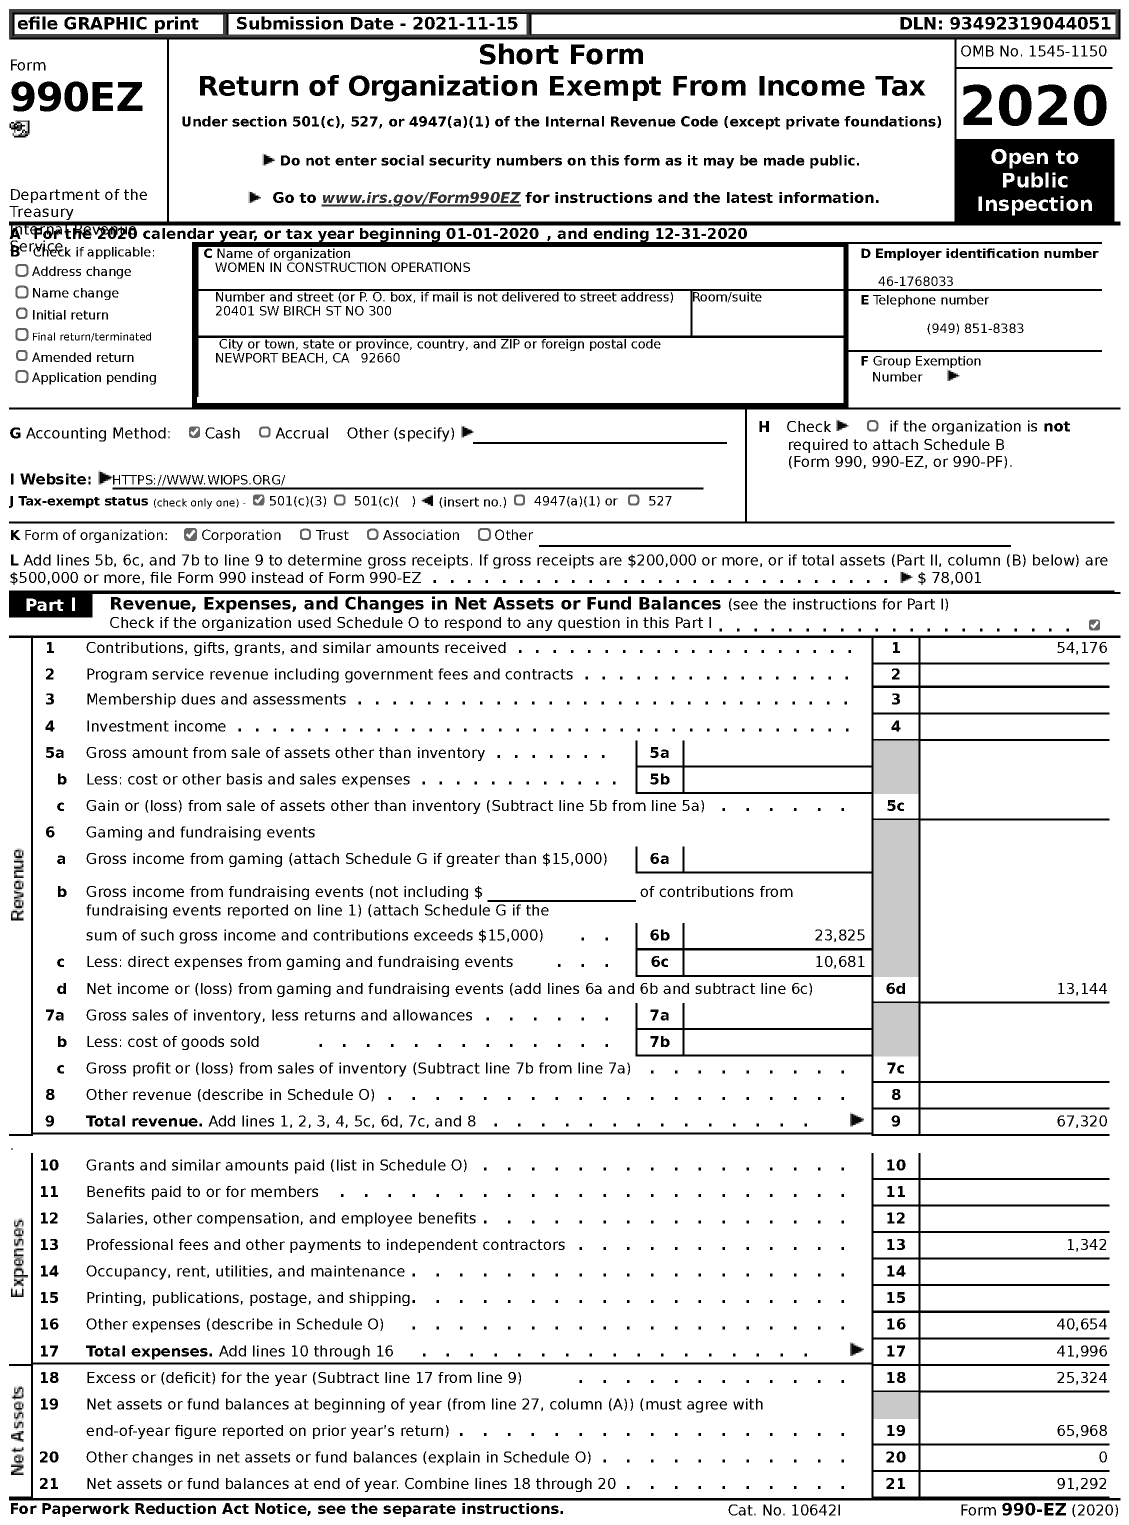 Image of first page of 2020 Form 990EZ for Women in Construction Operations